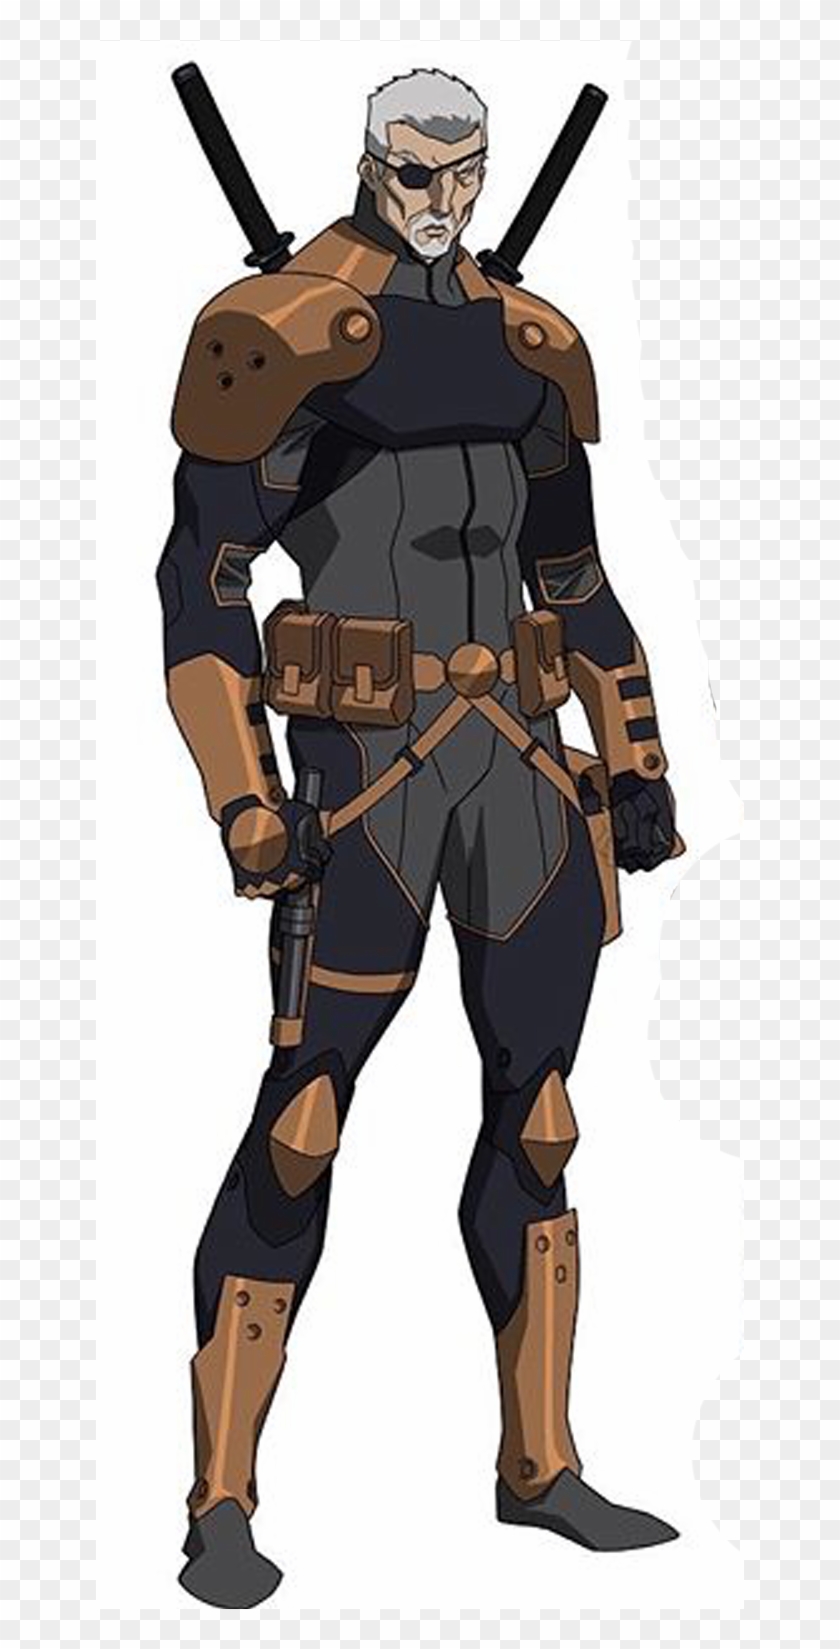 No Mask Batman Animated Movies, Young Justice Characters, - Teen Titans  Judas Contract Deathstroke, HD Png Download - 1140x1568(#755961) - PngFind